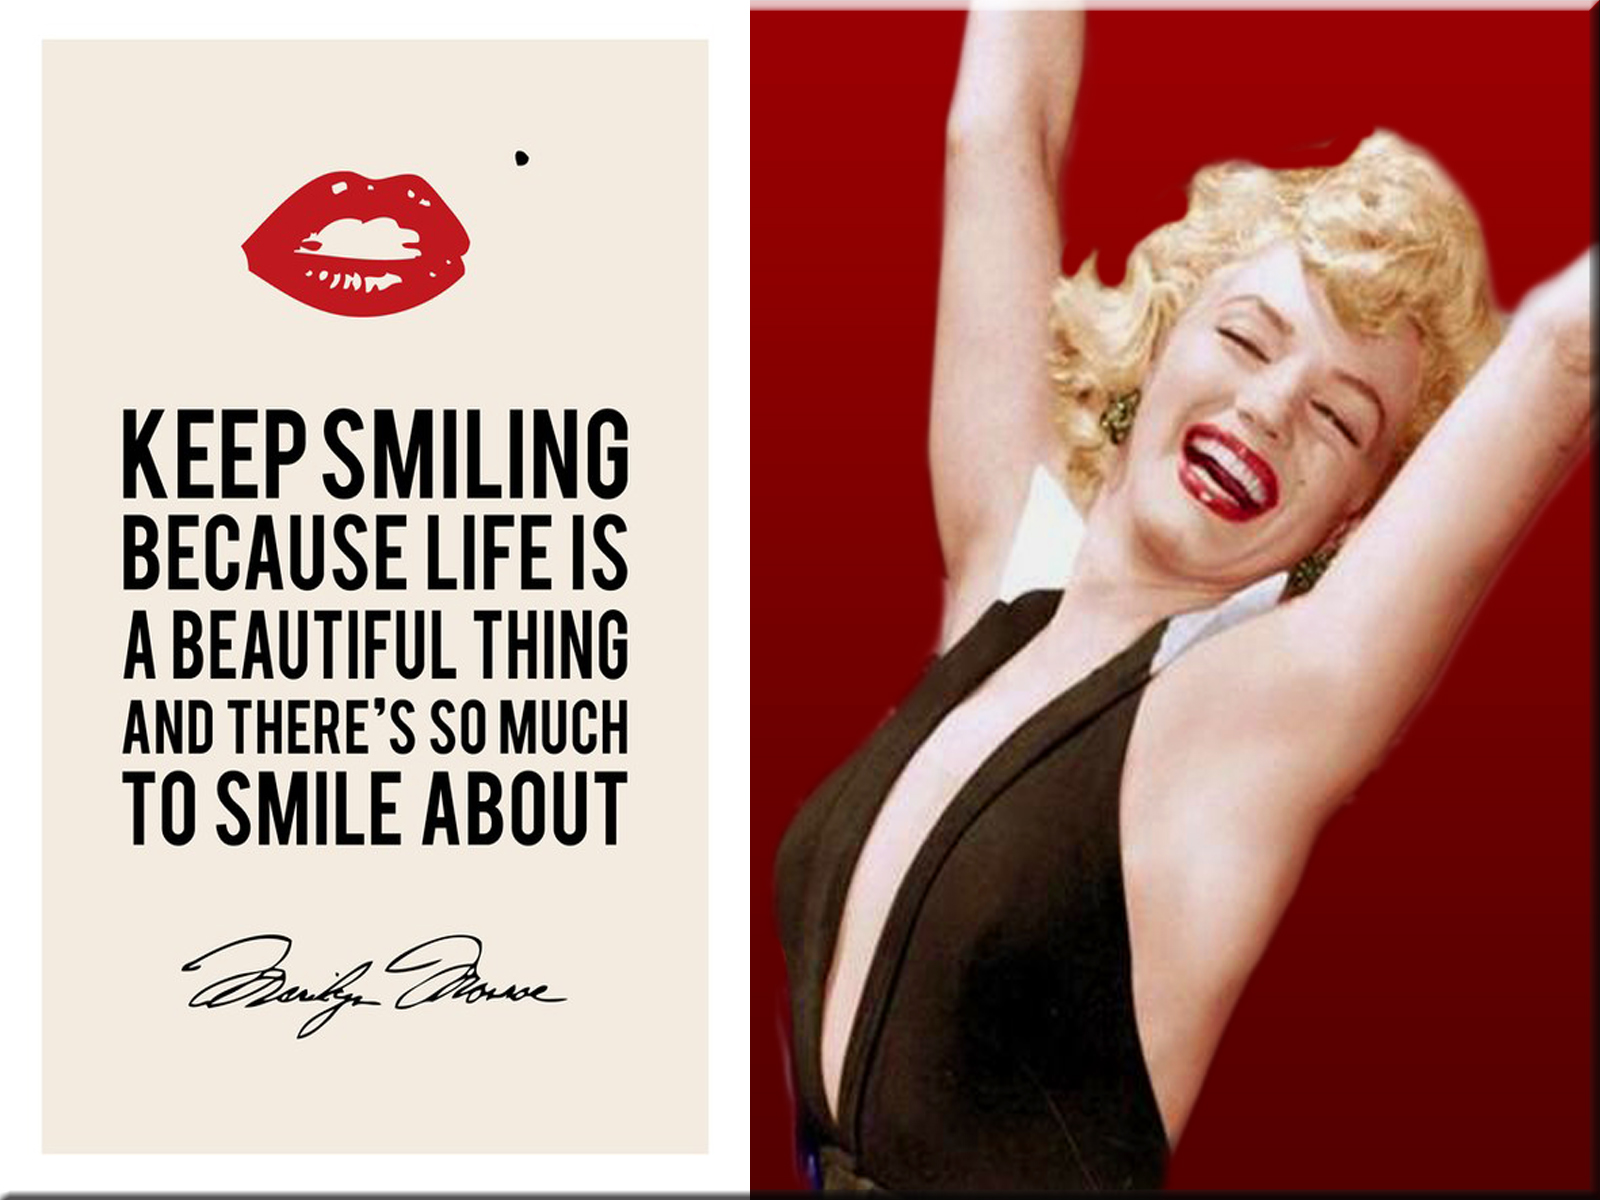 Marilyn Monroe Quotes Free DonwloadImage 2 of 3 | HD Wallpapers